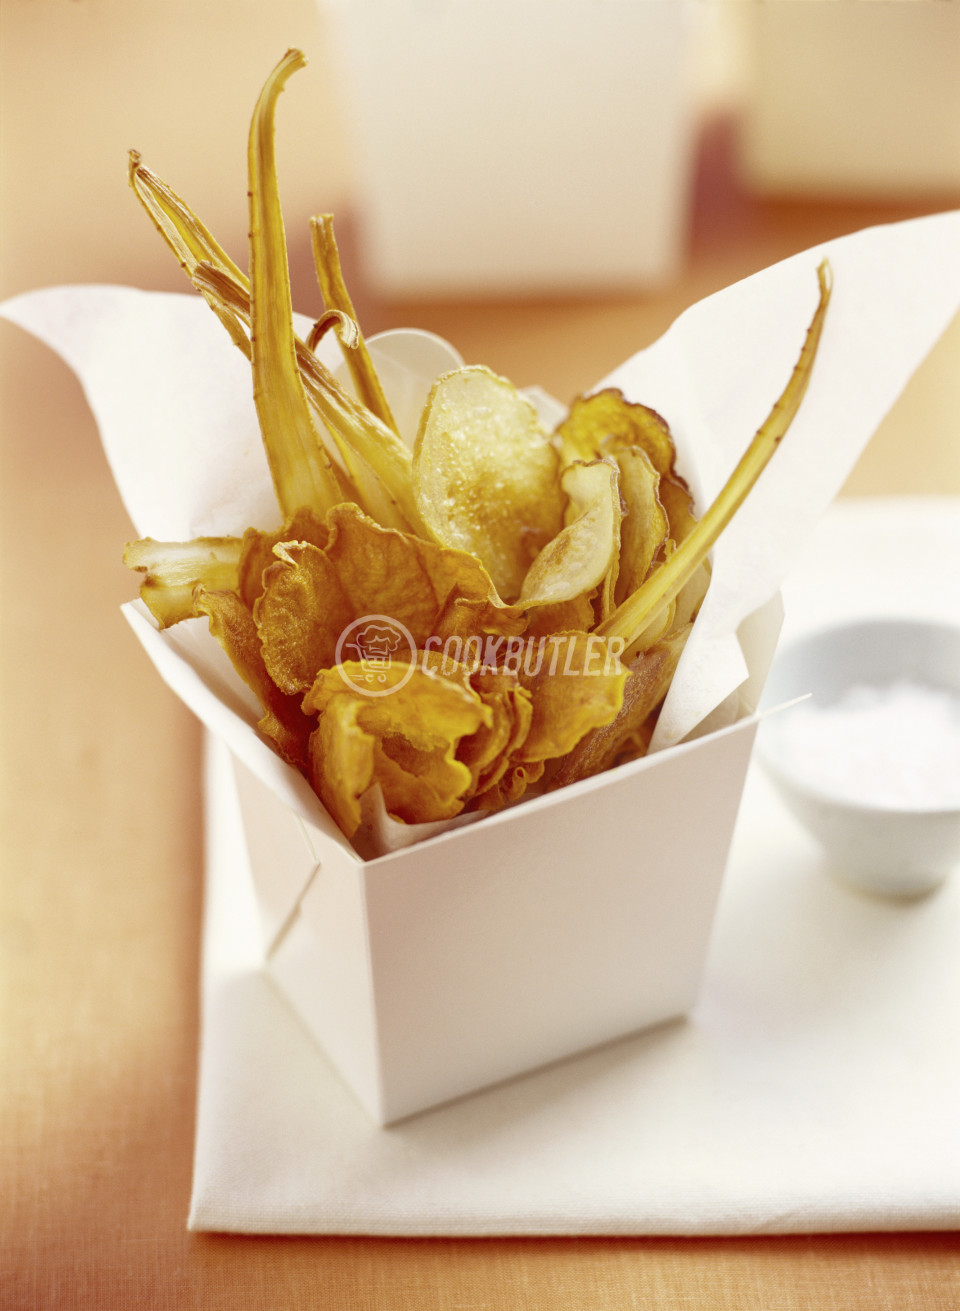 Root vegetable crisps | preview